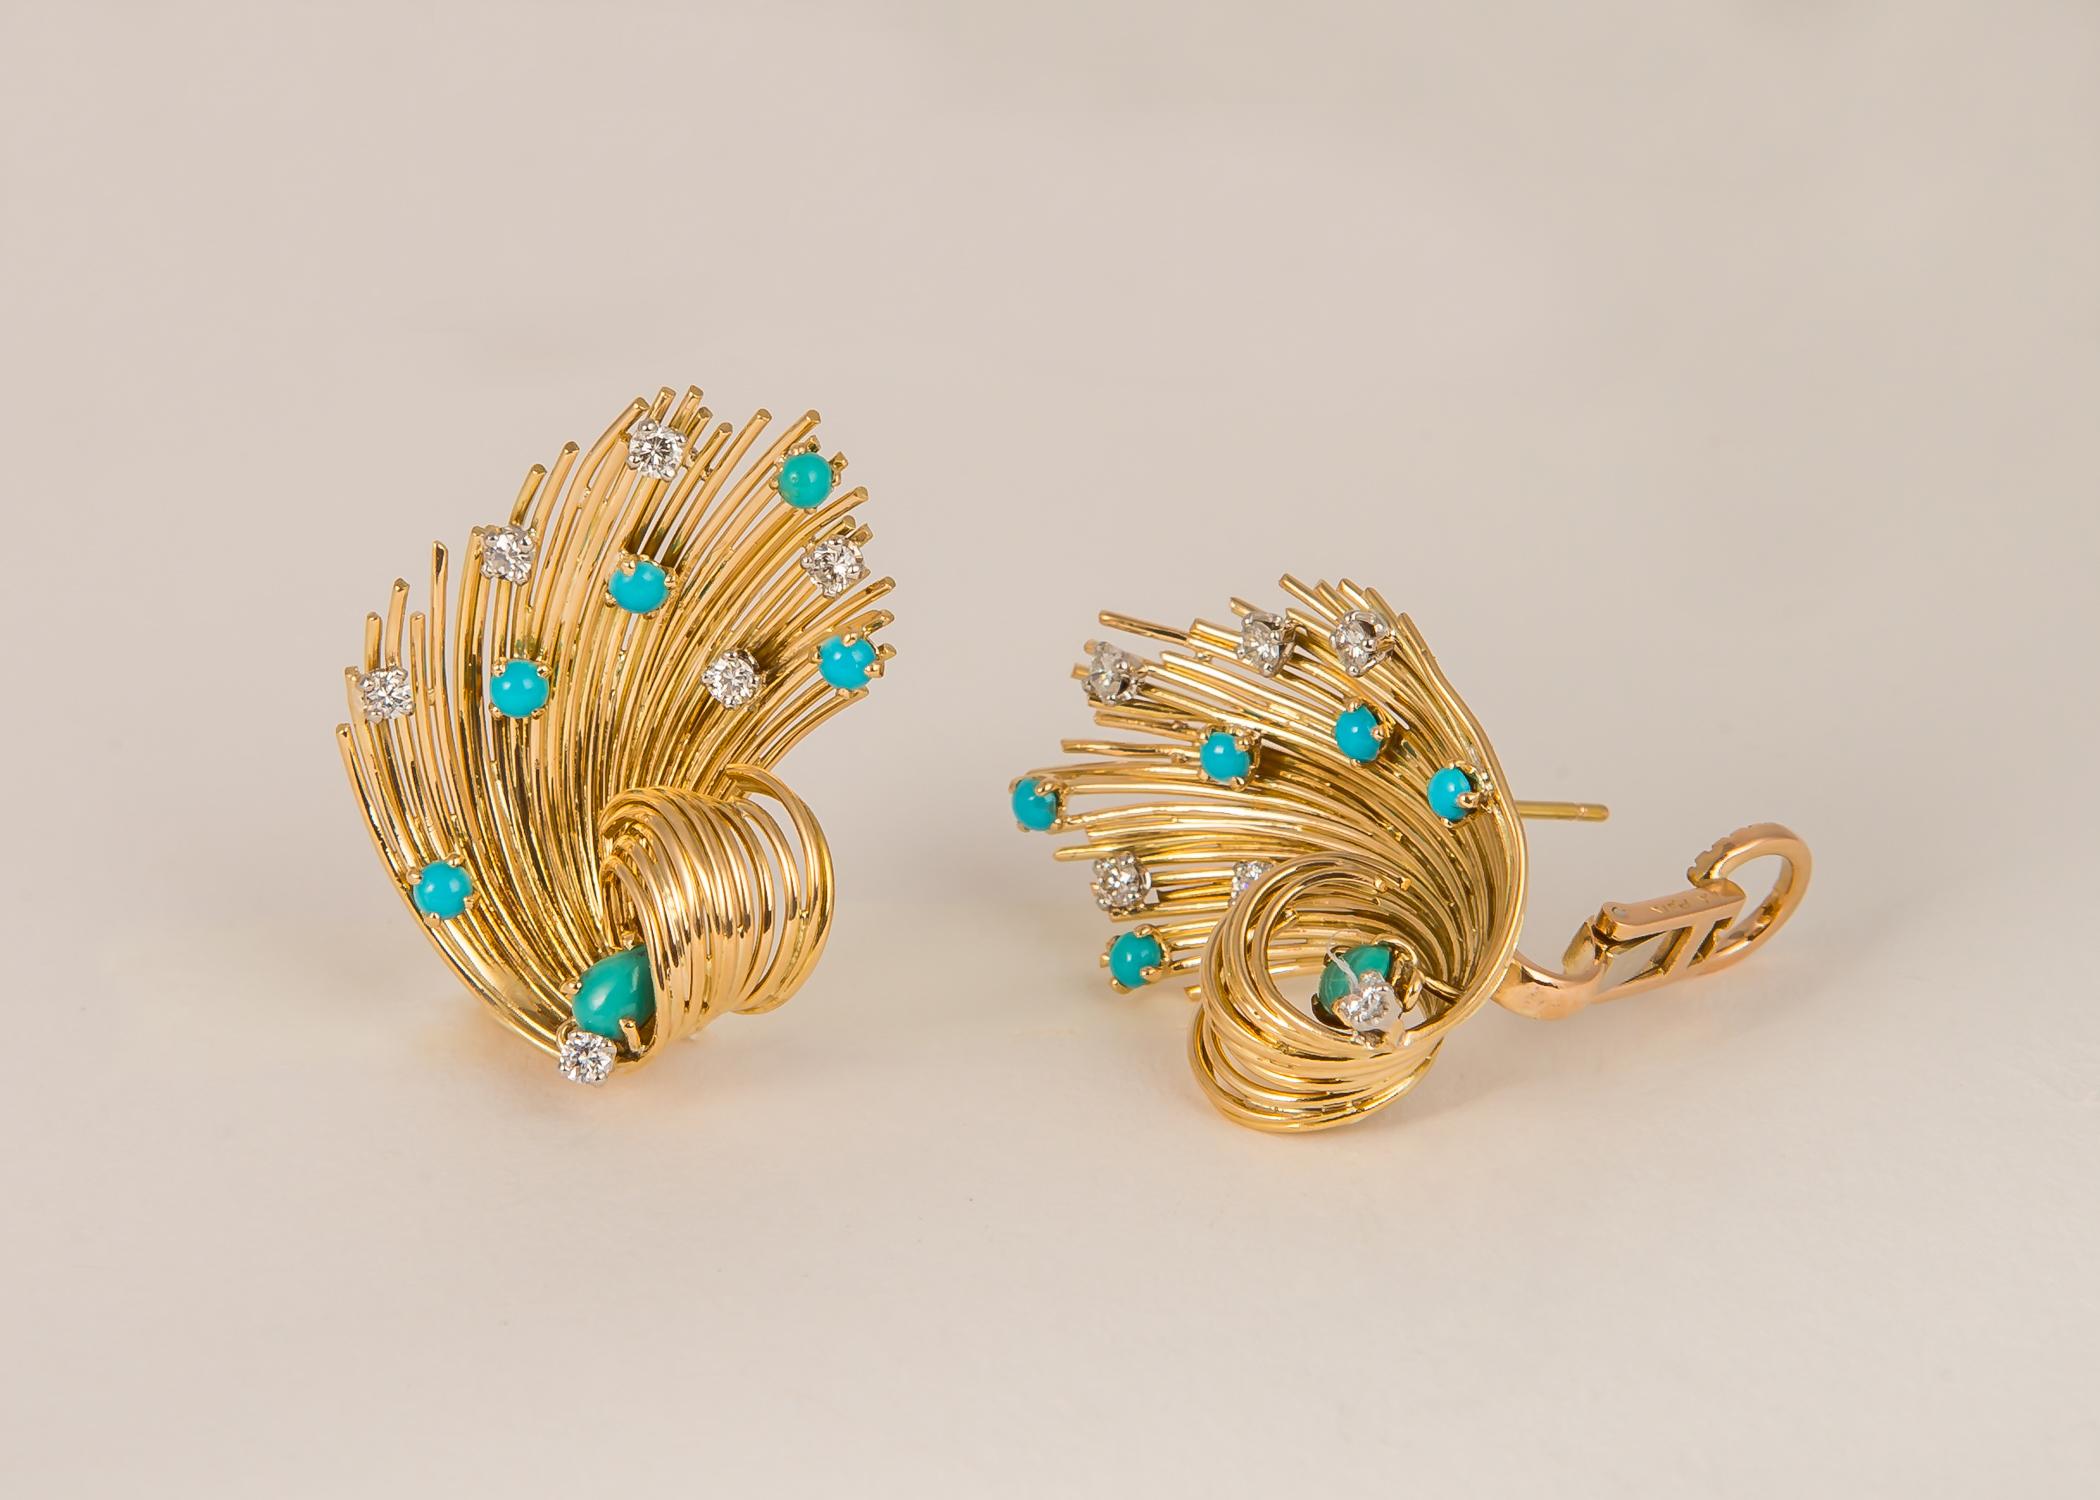 Glamour and elegance. Handmade in France with threads of 18k gold accented with turquoise and diamonds. 1 1/8 inches in length. A truly flattering shape. 